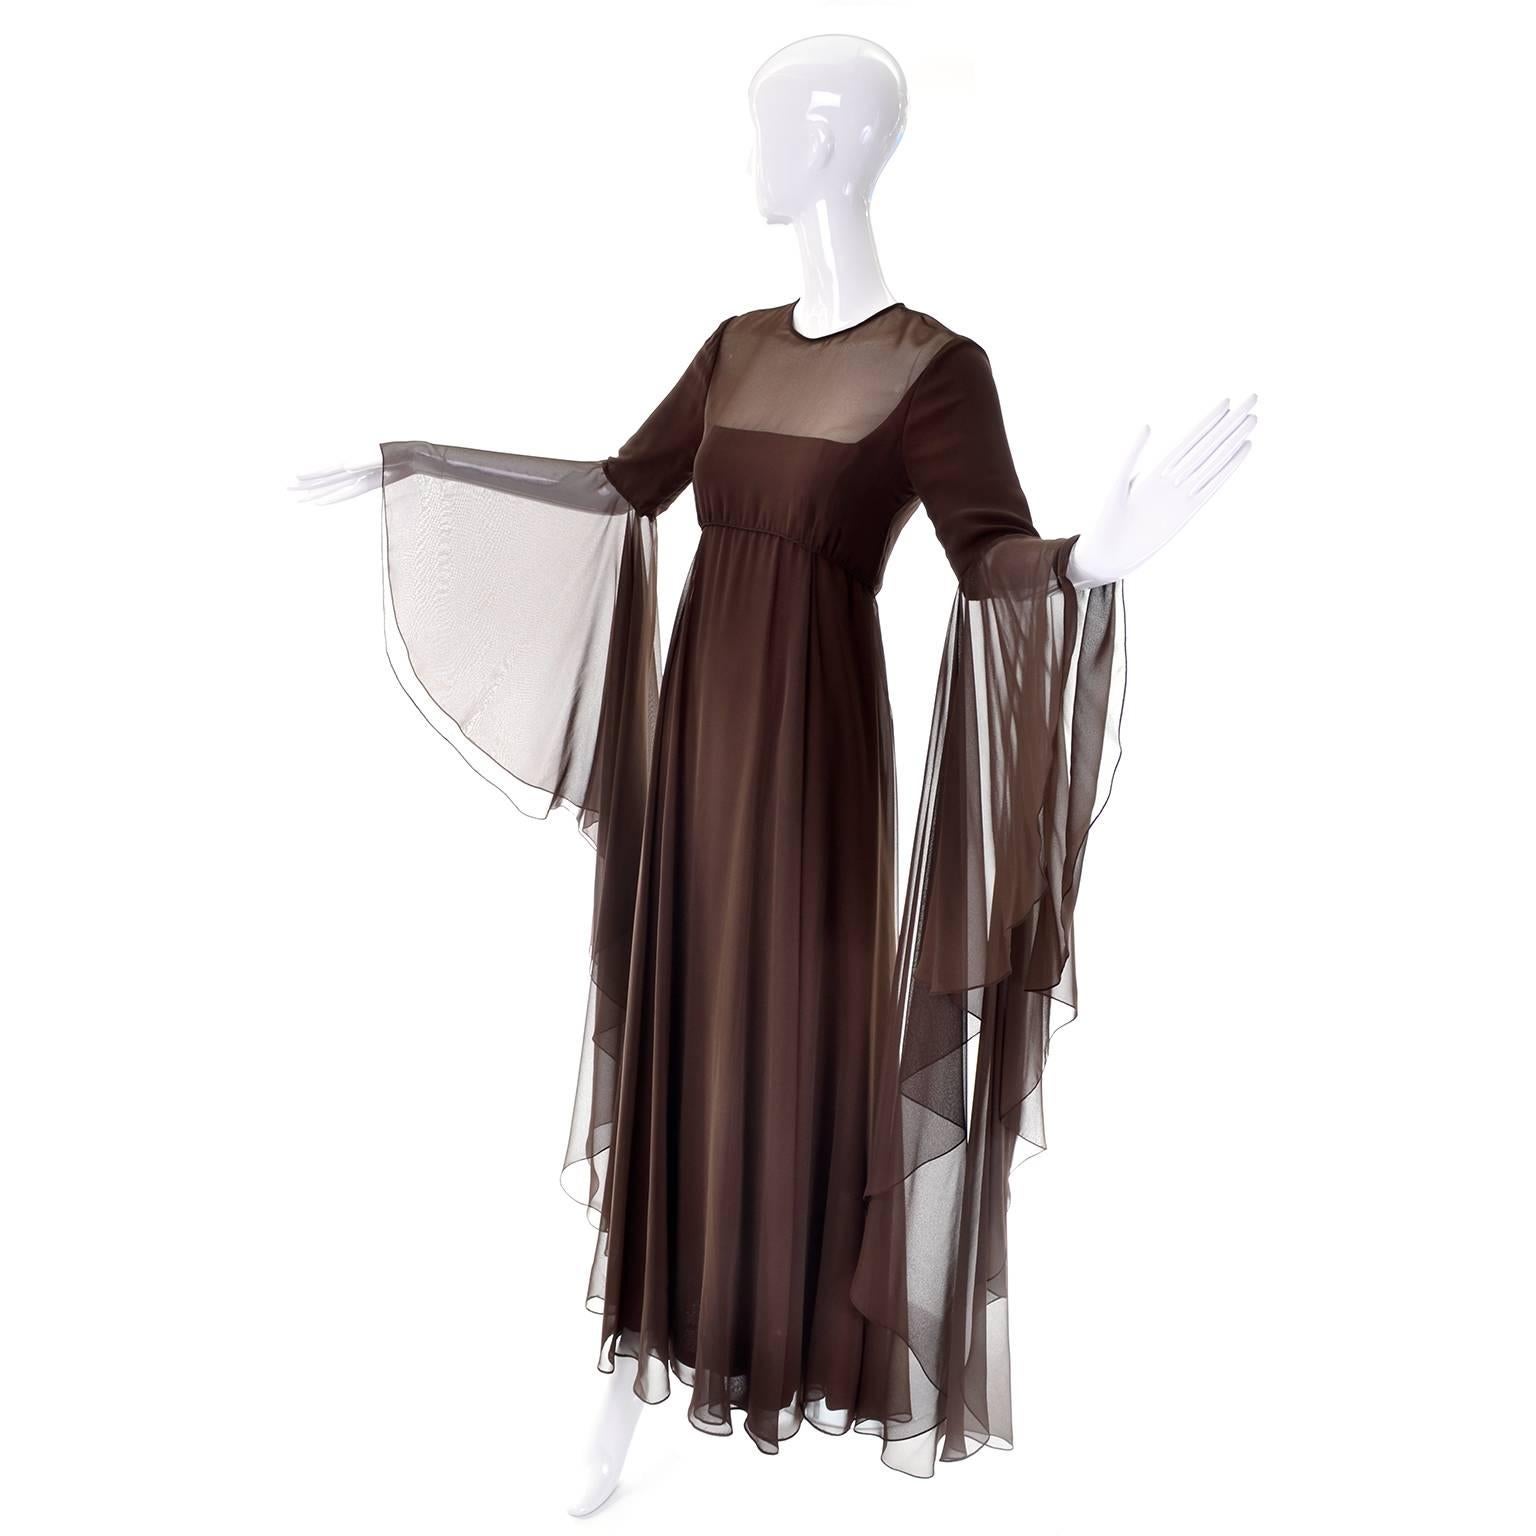 This is an outstanding vintage brown chiffon evening gown from Estevez for the Eva Gabor Look. This full length dress has dramatic statement sleeves that are are lined to the elbow.  The sleeves drape almost to the floor!  There is an empire waist